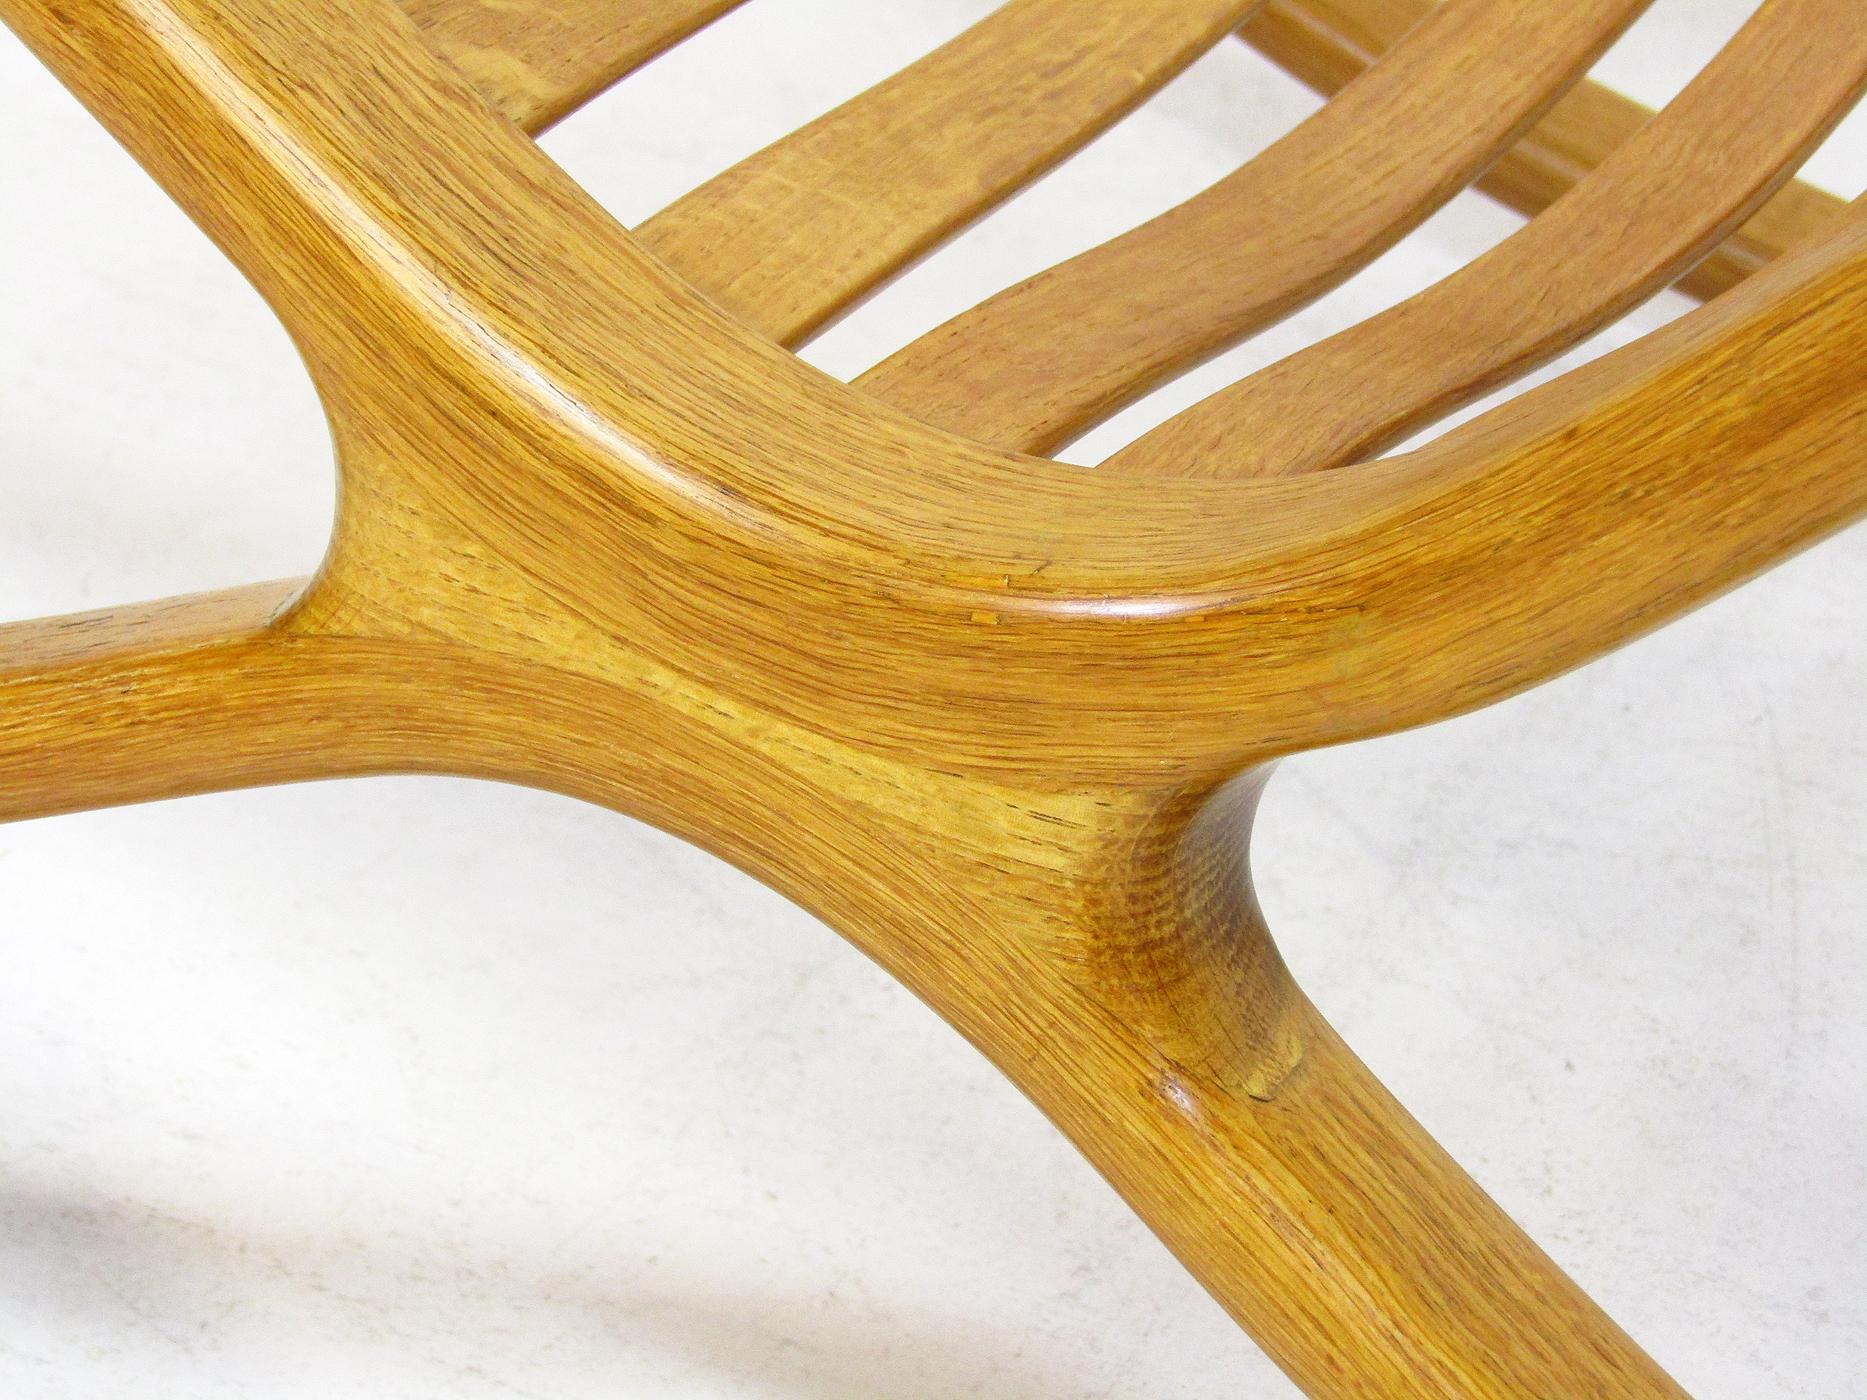 20th Century Sculptural 1960s Wishbone Rocking Chair In Oak By Robin Williams For Sale